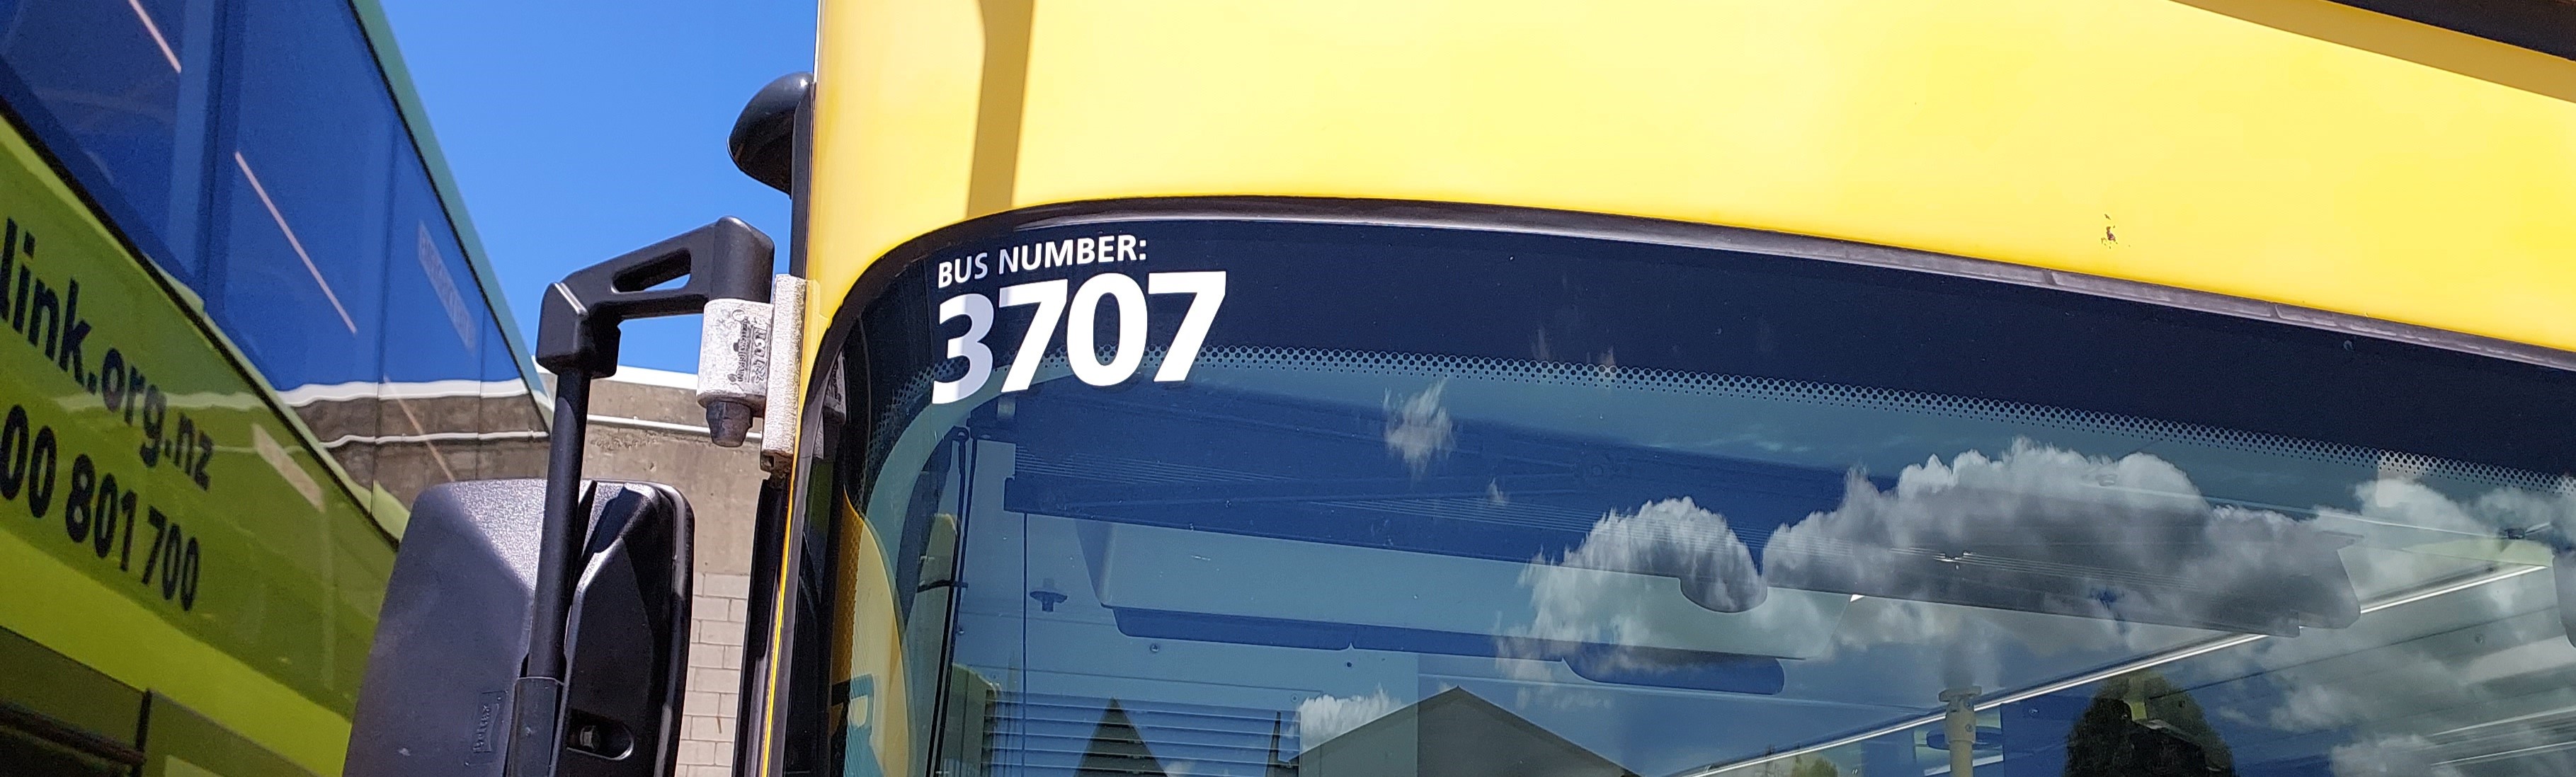 Picture of the bus number on the windscreen of a bus